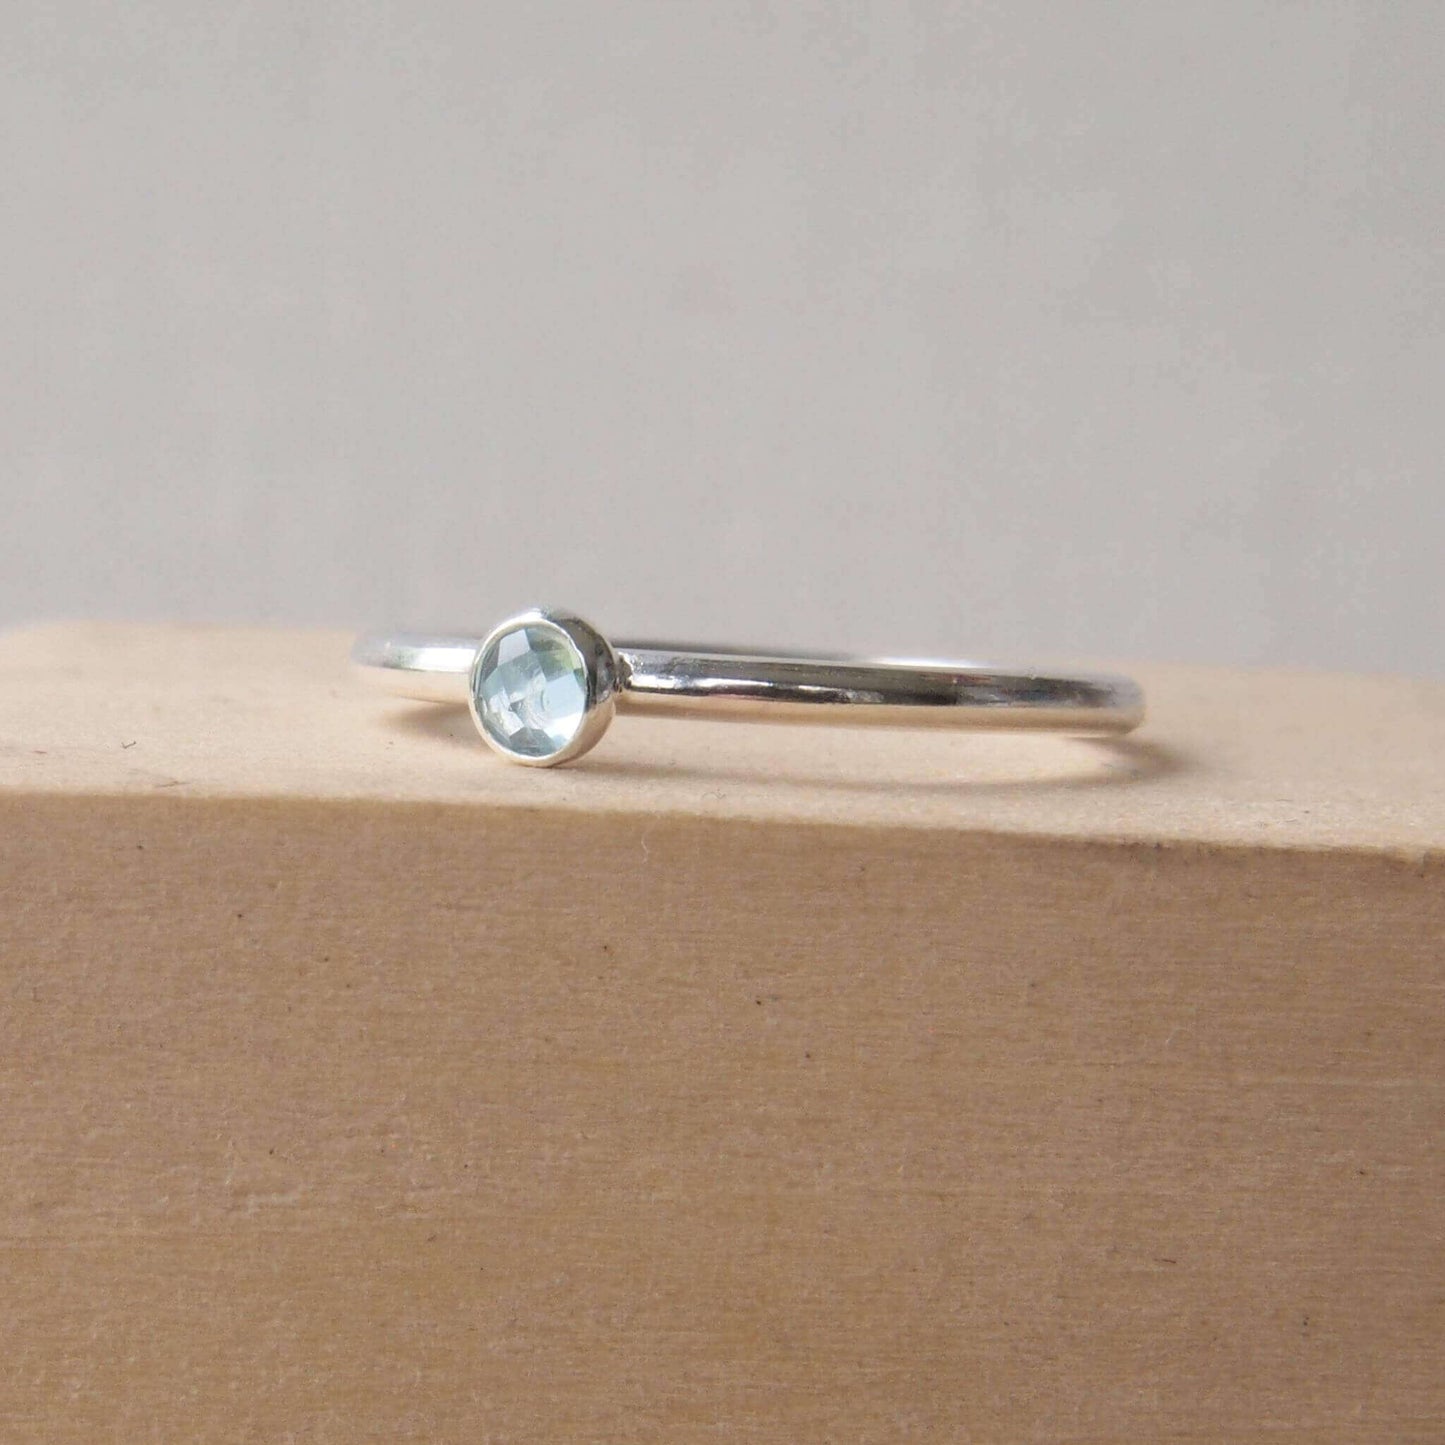 Blue Topaz and Sterling Silver Birthstone RIng for March. The ring is simple in style on a plain fully round band with a small round facet cut pale blue topaz in the centre. The ring is handmade to your size by maram jewellery in Scotland